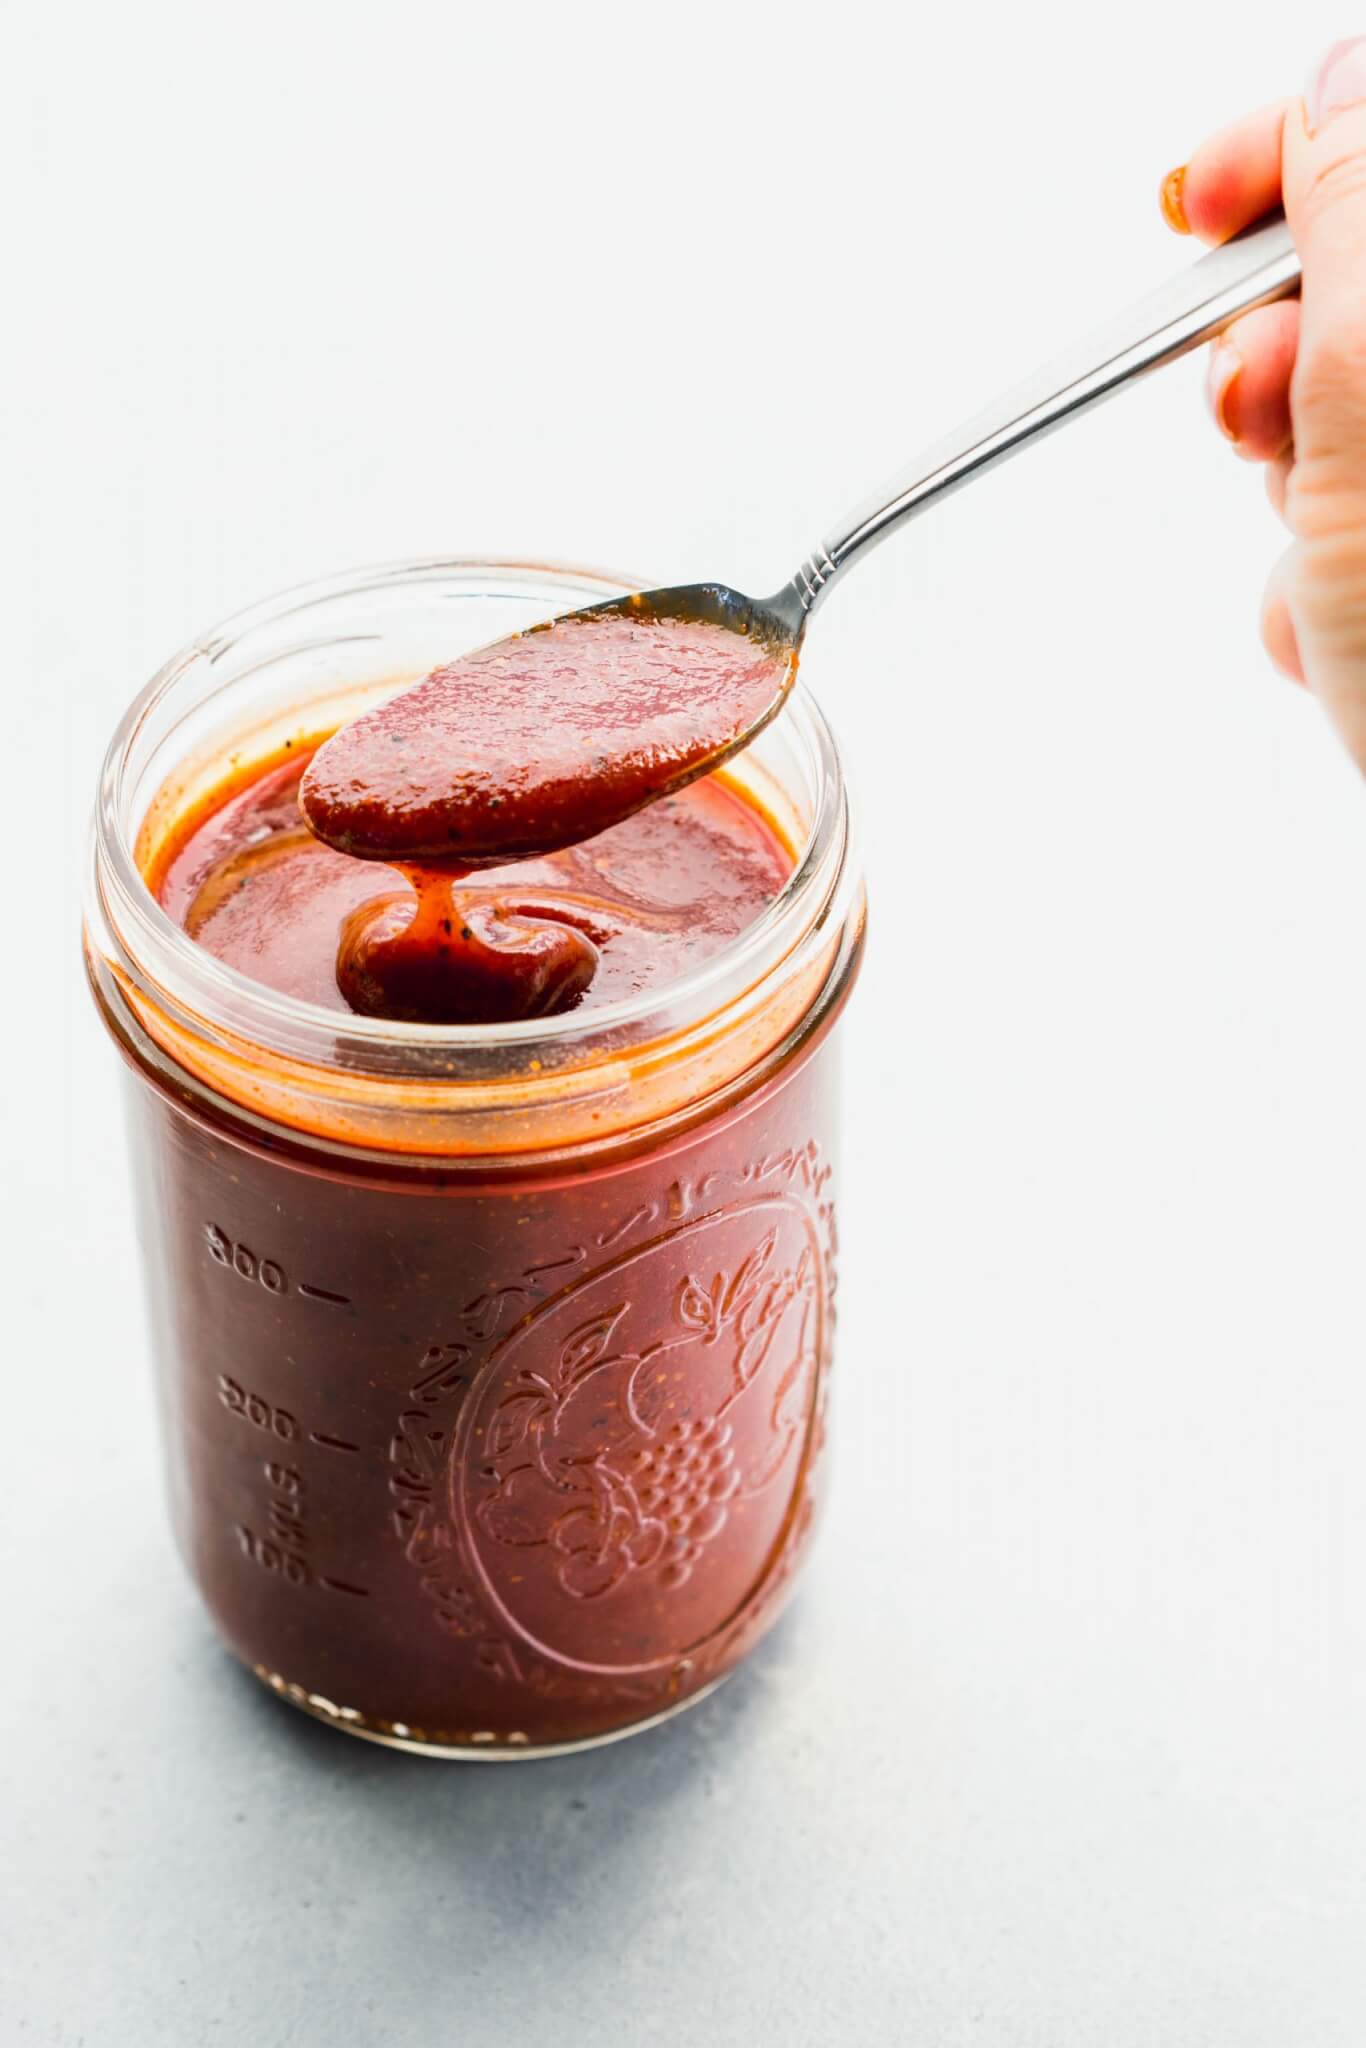 Spoon lifting bbq sauce out of jar.